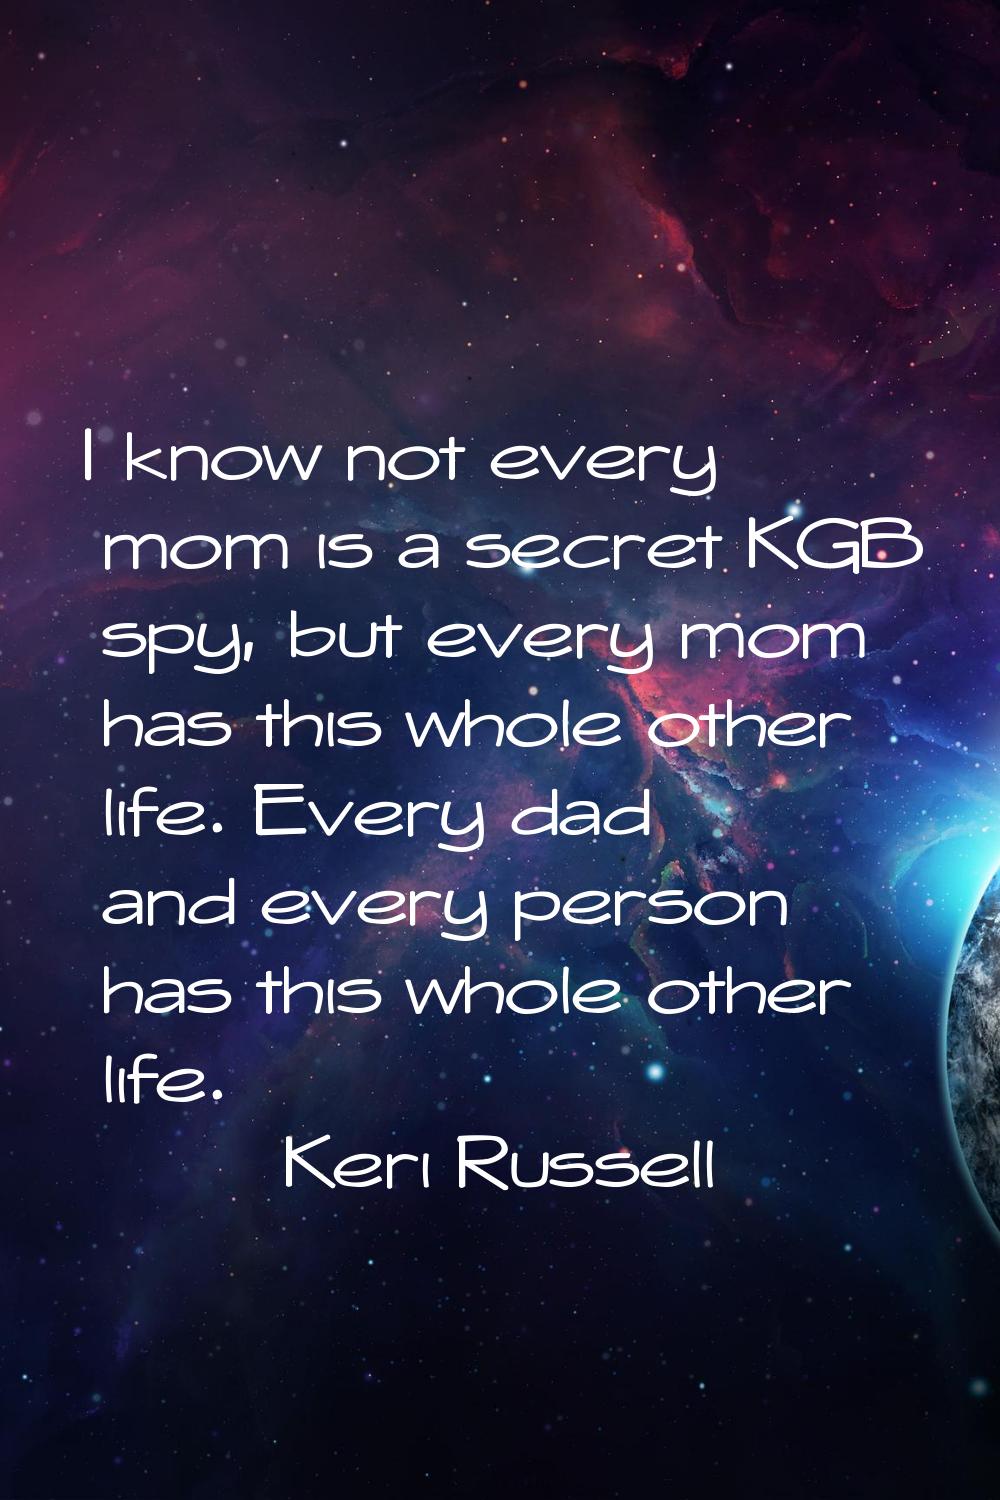 I know not every mom is a secret KGB spy, but every mom has this whole other life. Every dad and ev